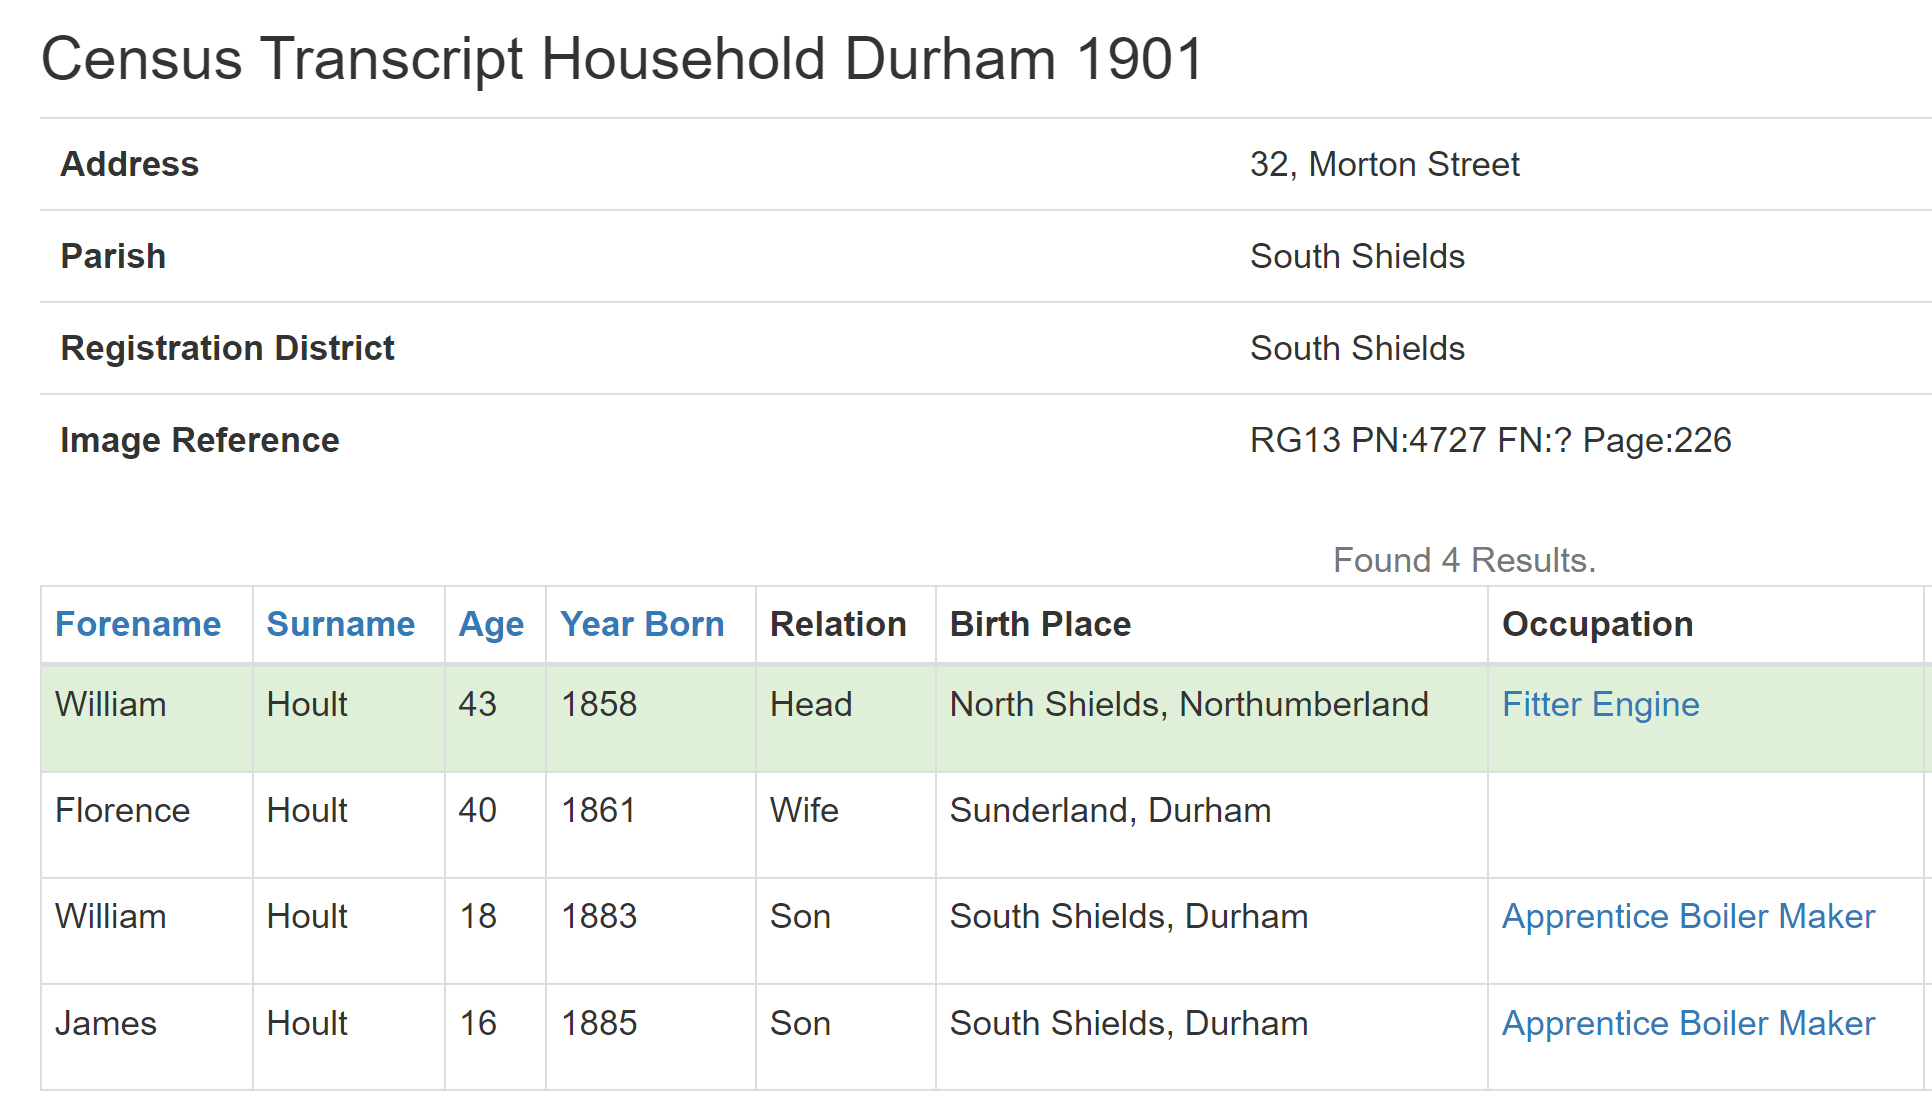 Hoult family on the 1901 Census